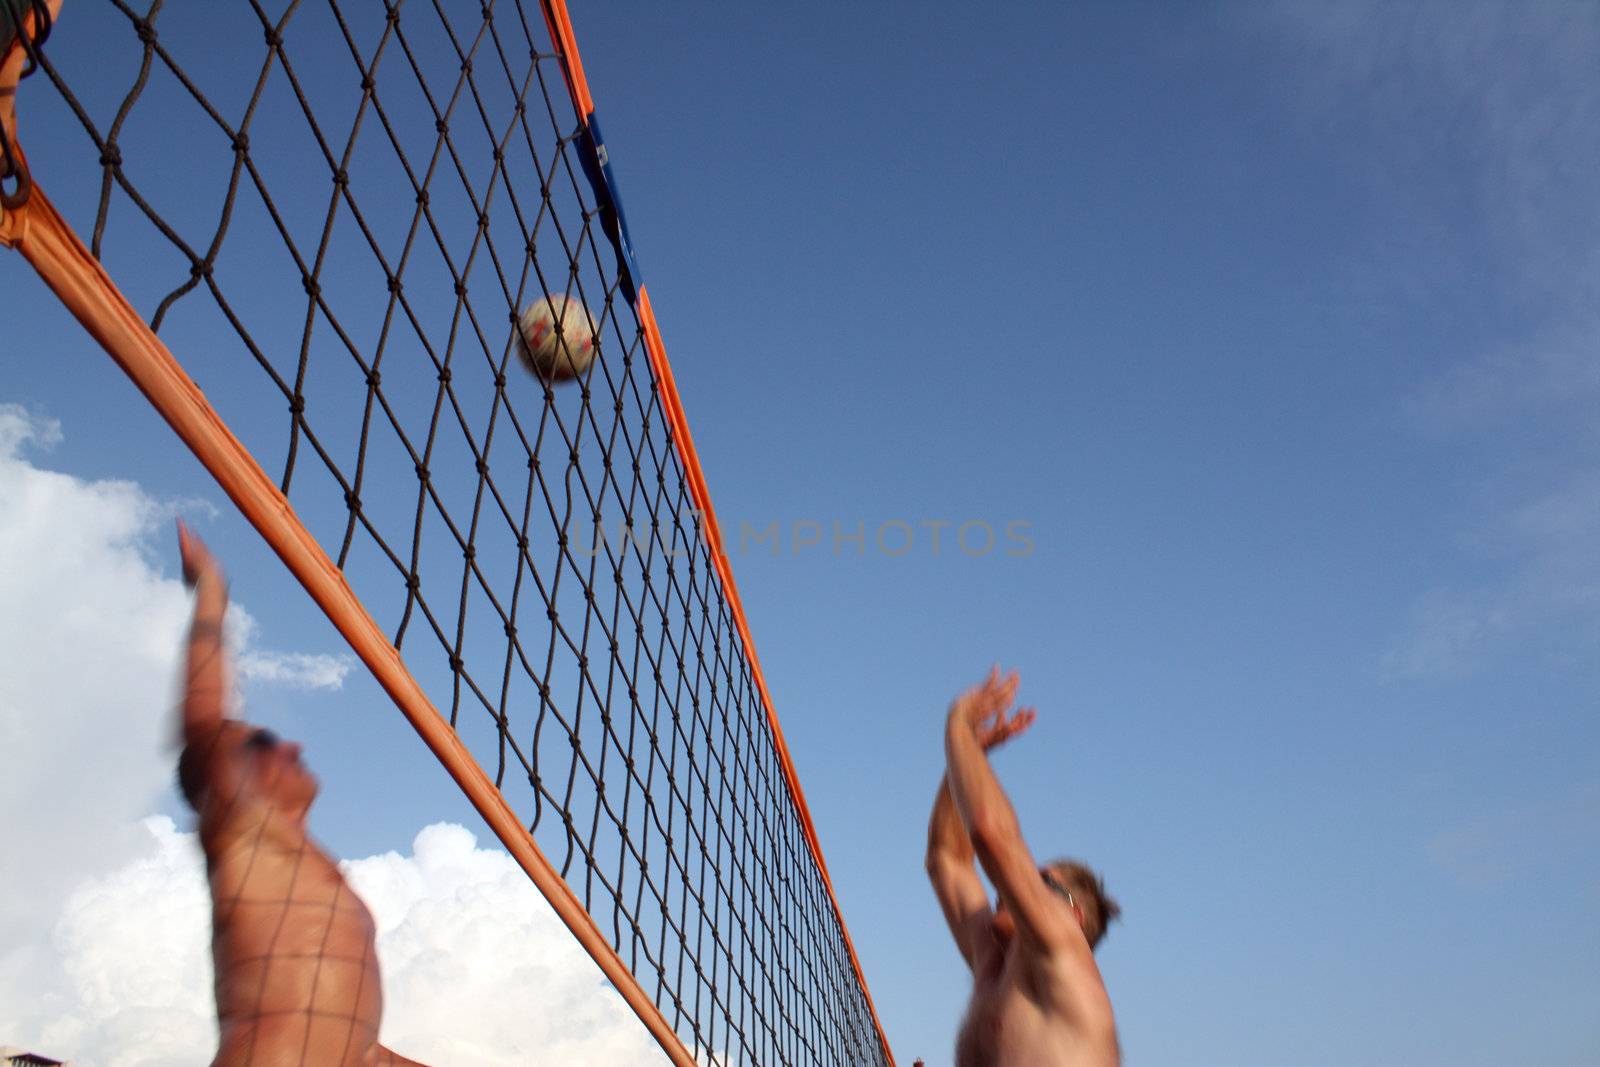 Beach volleyball by alexpsp